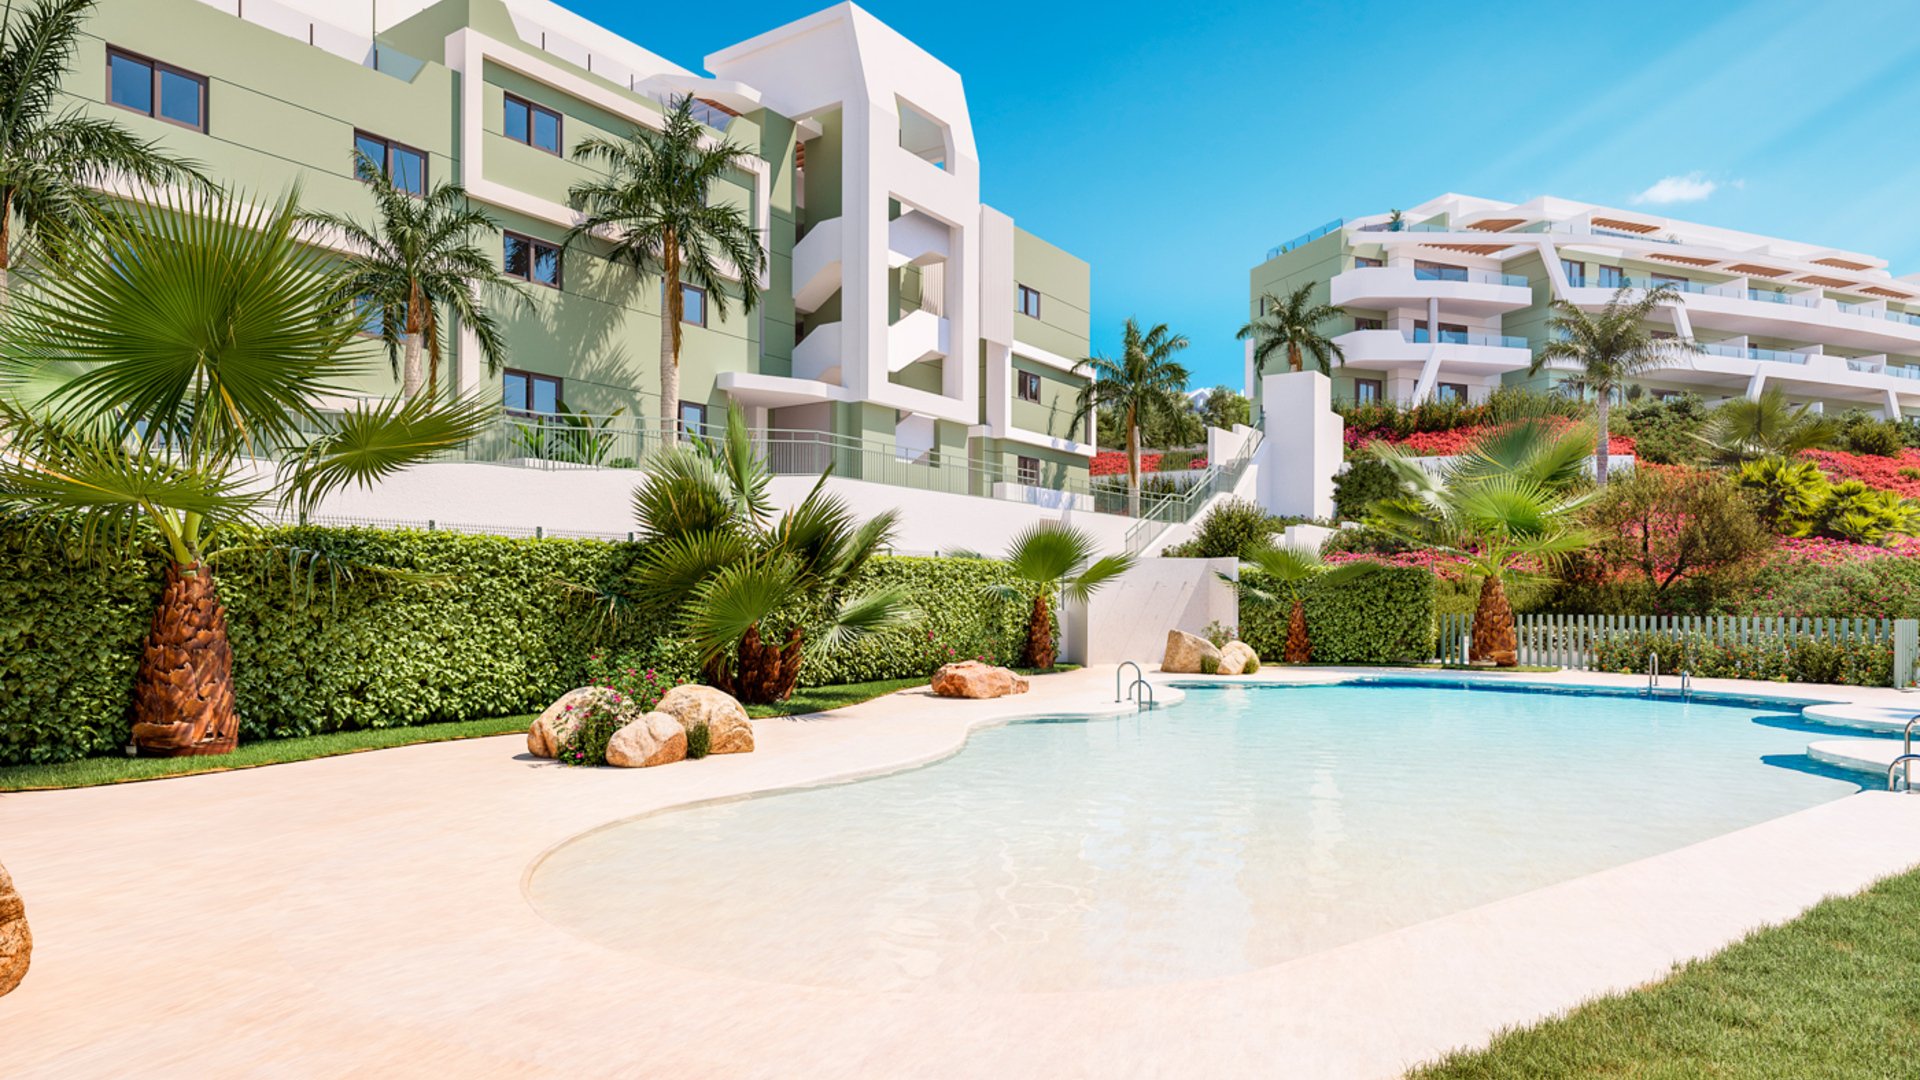 Apartments with a touch of exoticism in La Cala de Mijas